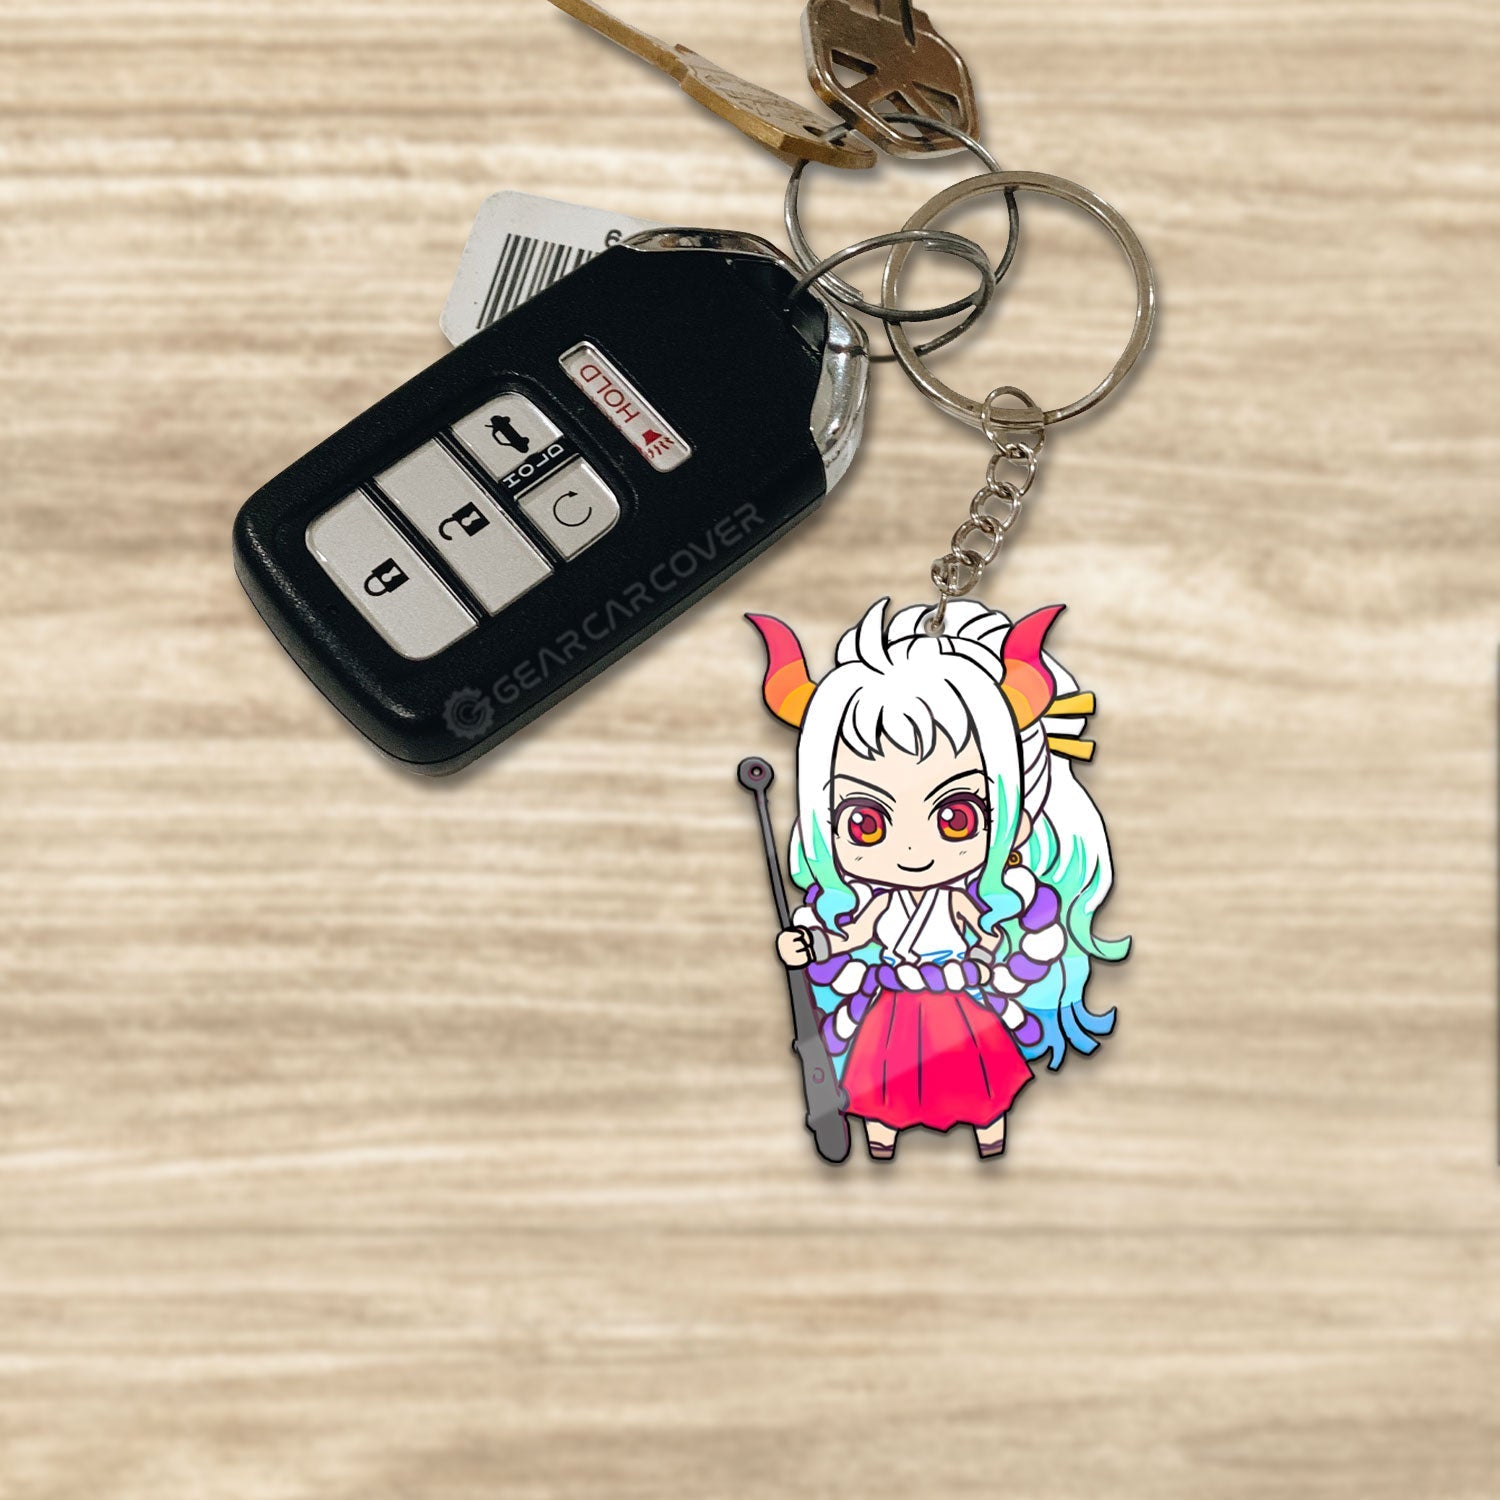 Yamato Keychains Custom One Piece Anime Car Accessories - Gearcarcover - 1